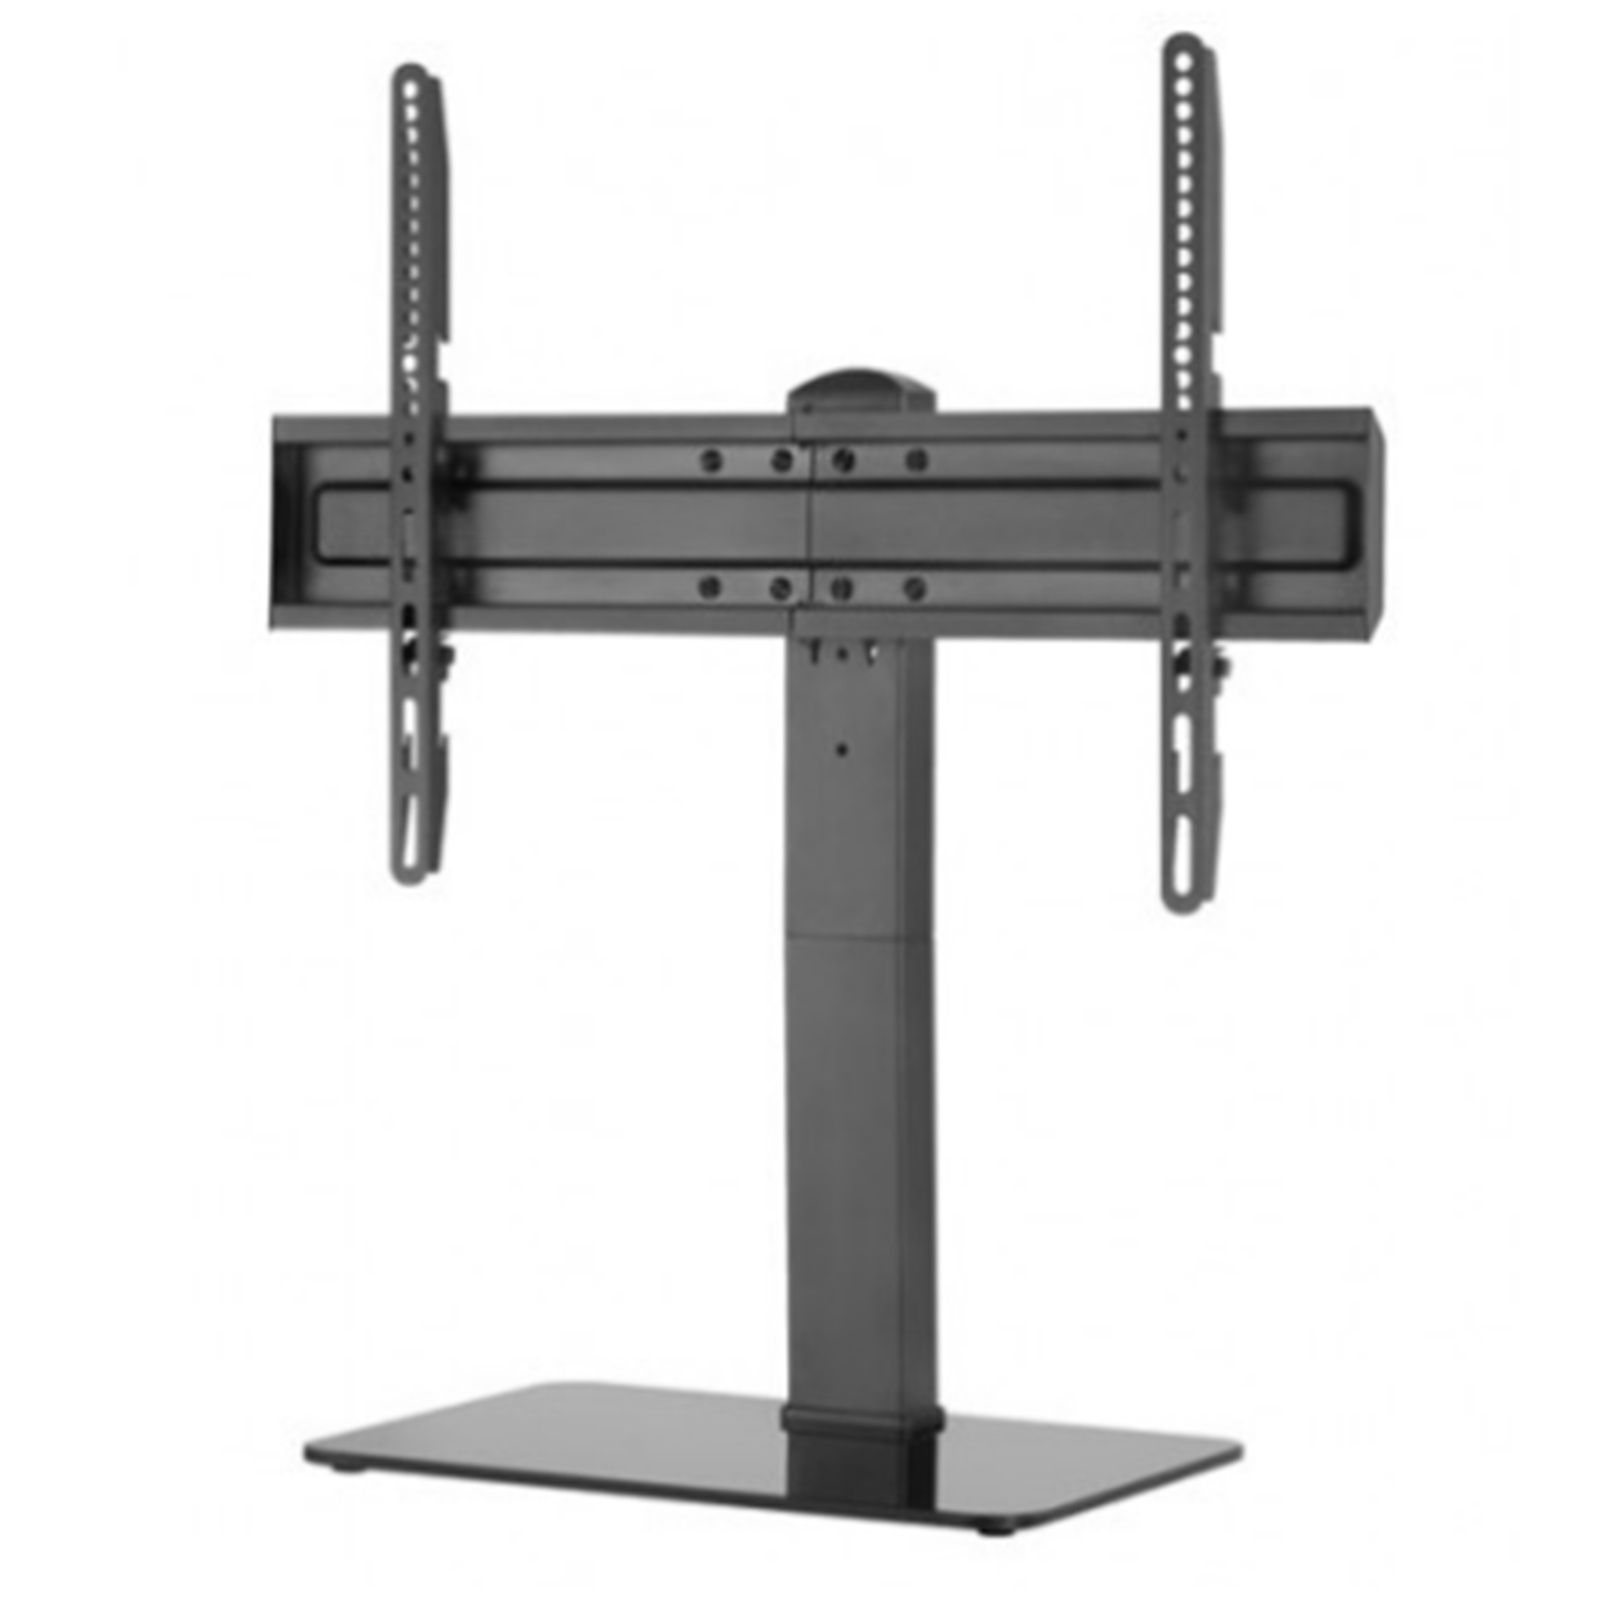 Buy The Omp M7446 Universal Tabletop Tv Stand Large 37 70 Vesa 400 ( M7446  ) Online – Pbtech.co.nz With Regard To Universal Tabletop Tv Stands (Photo 3 of 15)